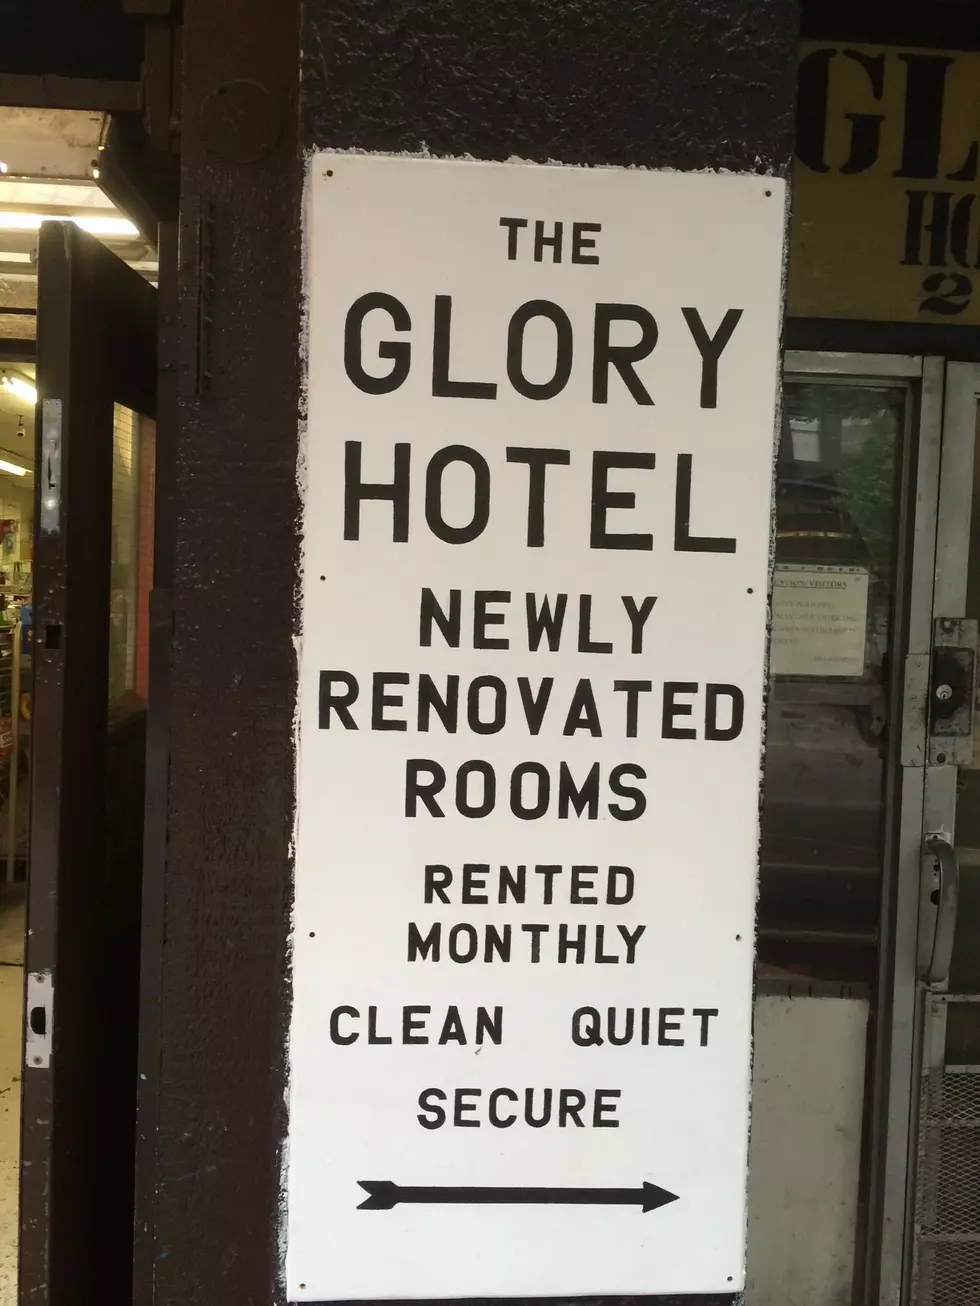 BDSM Fan? Then You’ll Want To Try Vancouver’s Glory Hotel!